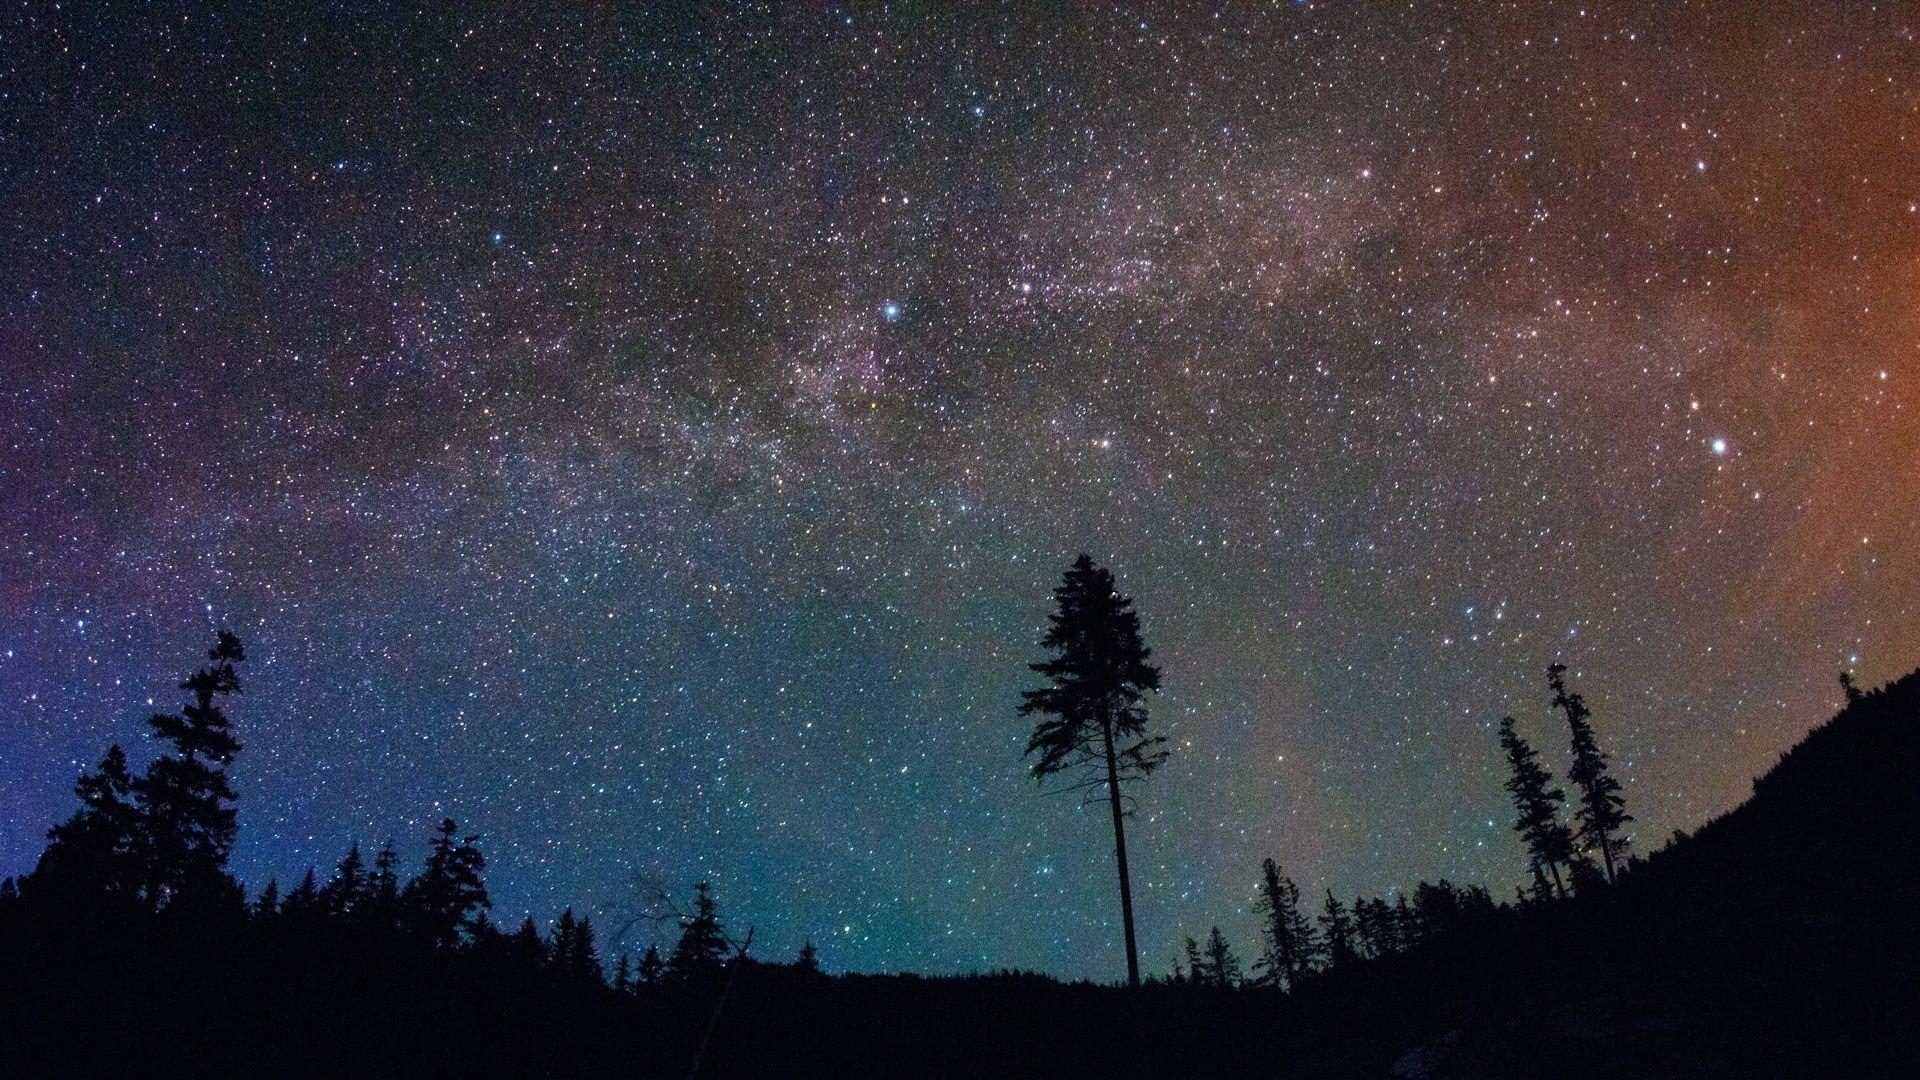 The night sky with stars above a forest - Camping